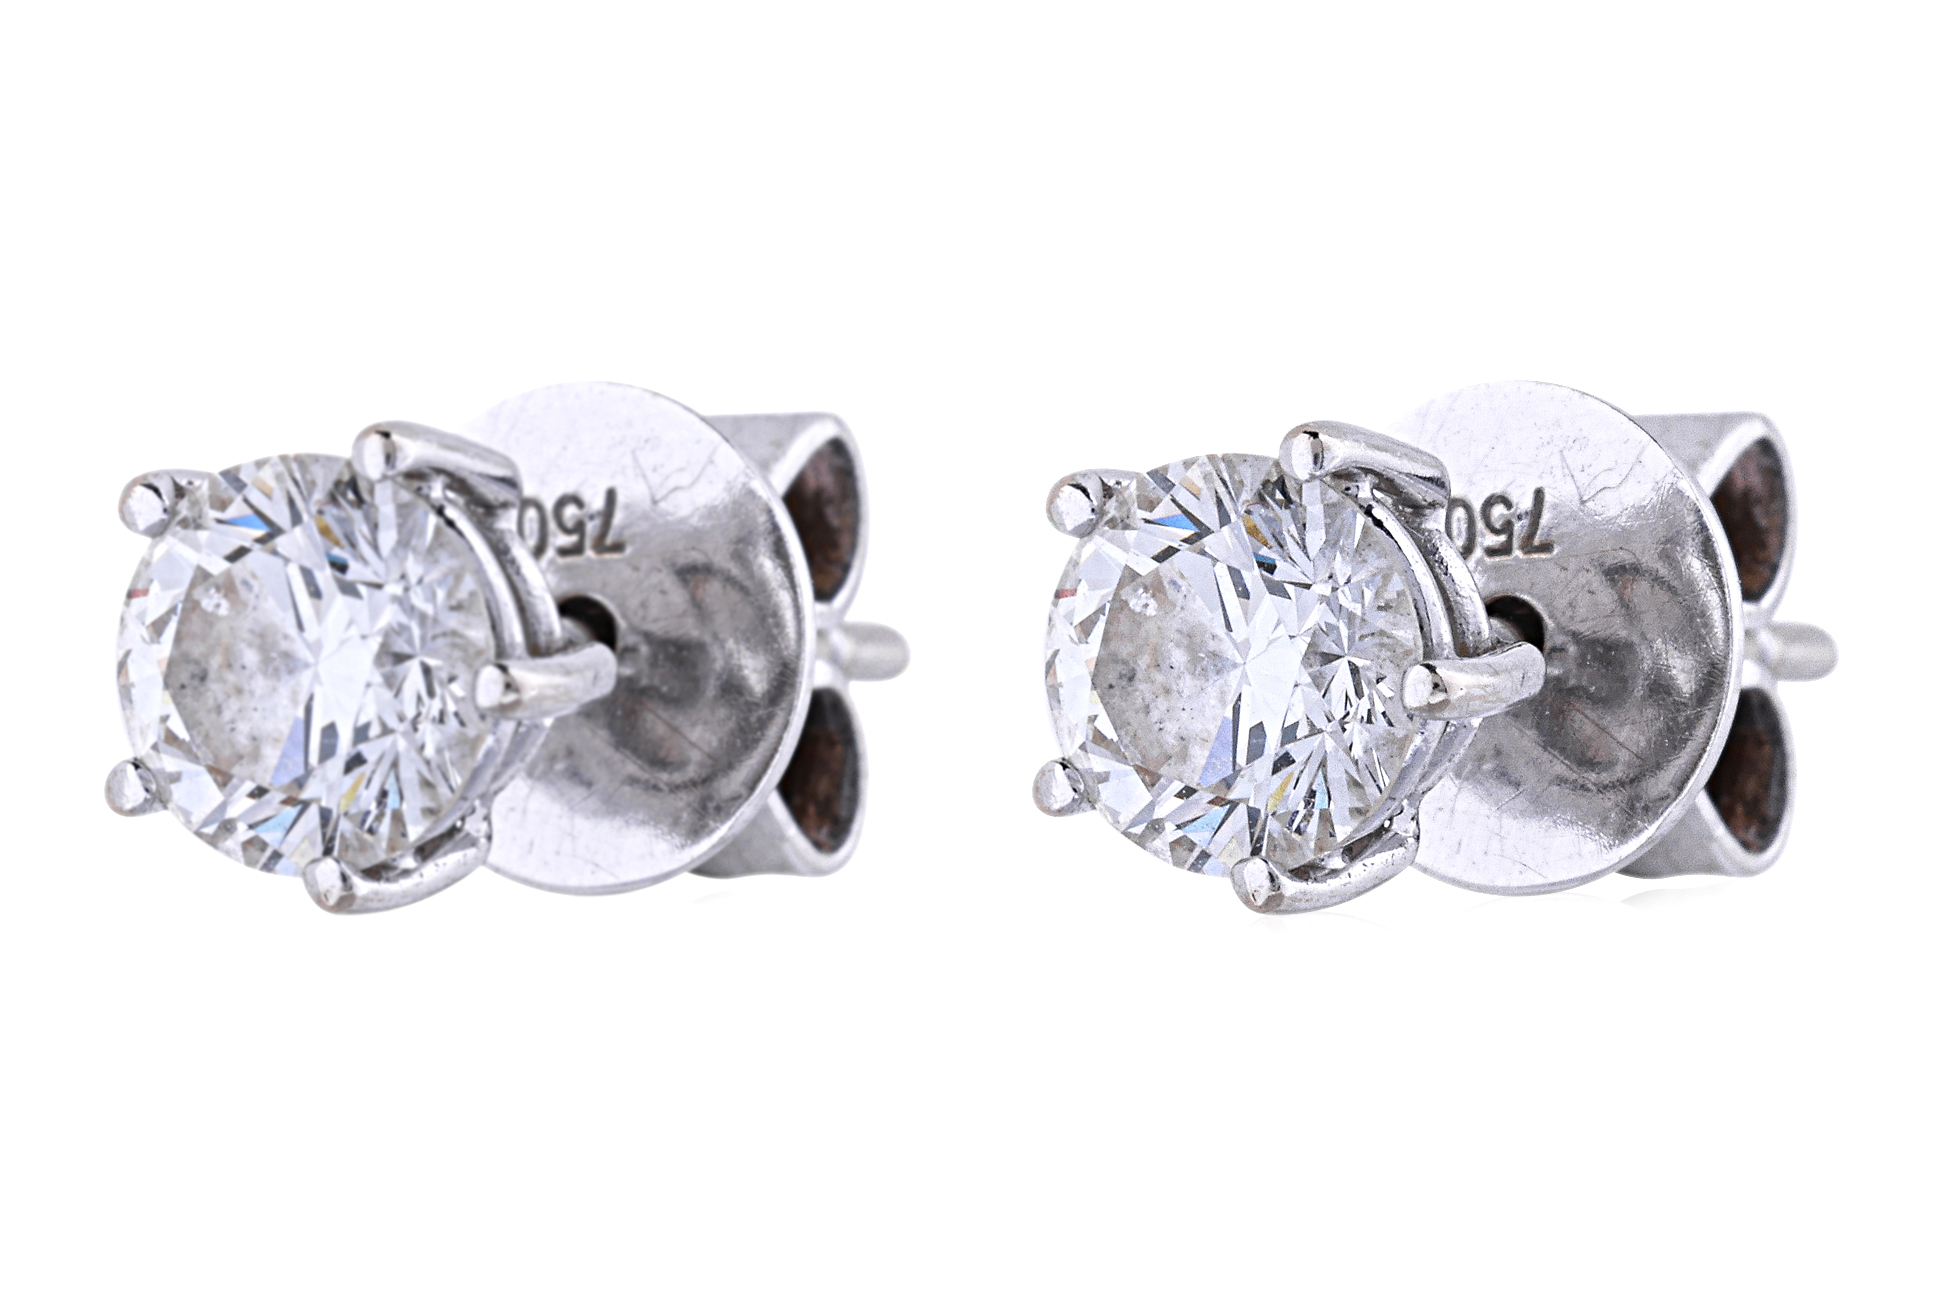 A PAIR OF SOLITAIRE DIAMOND STUD EARRINGS - Image 2 of 4